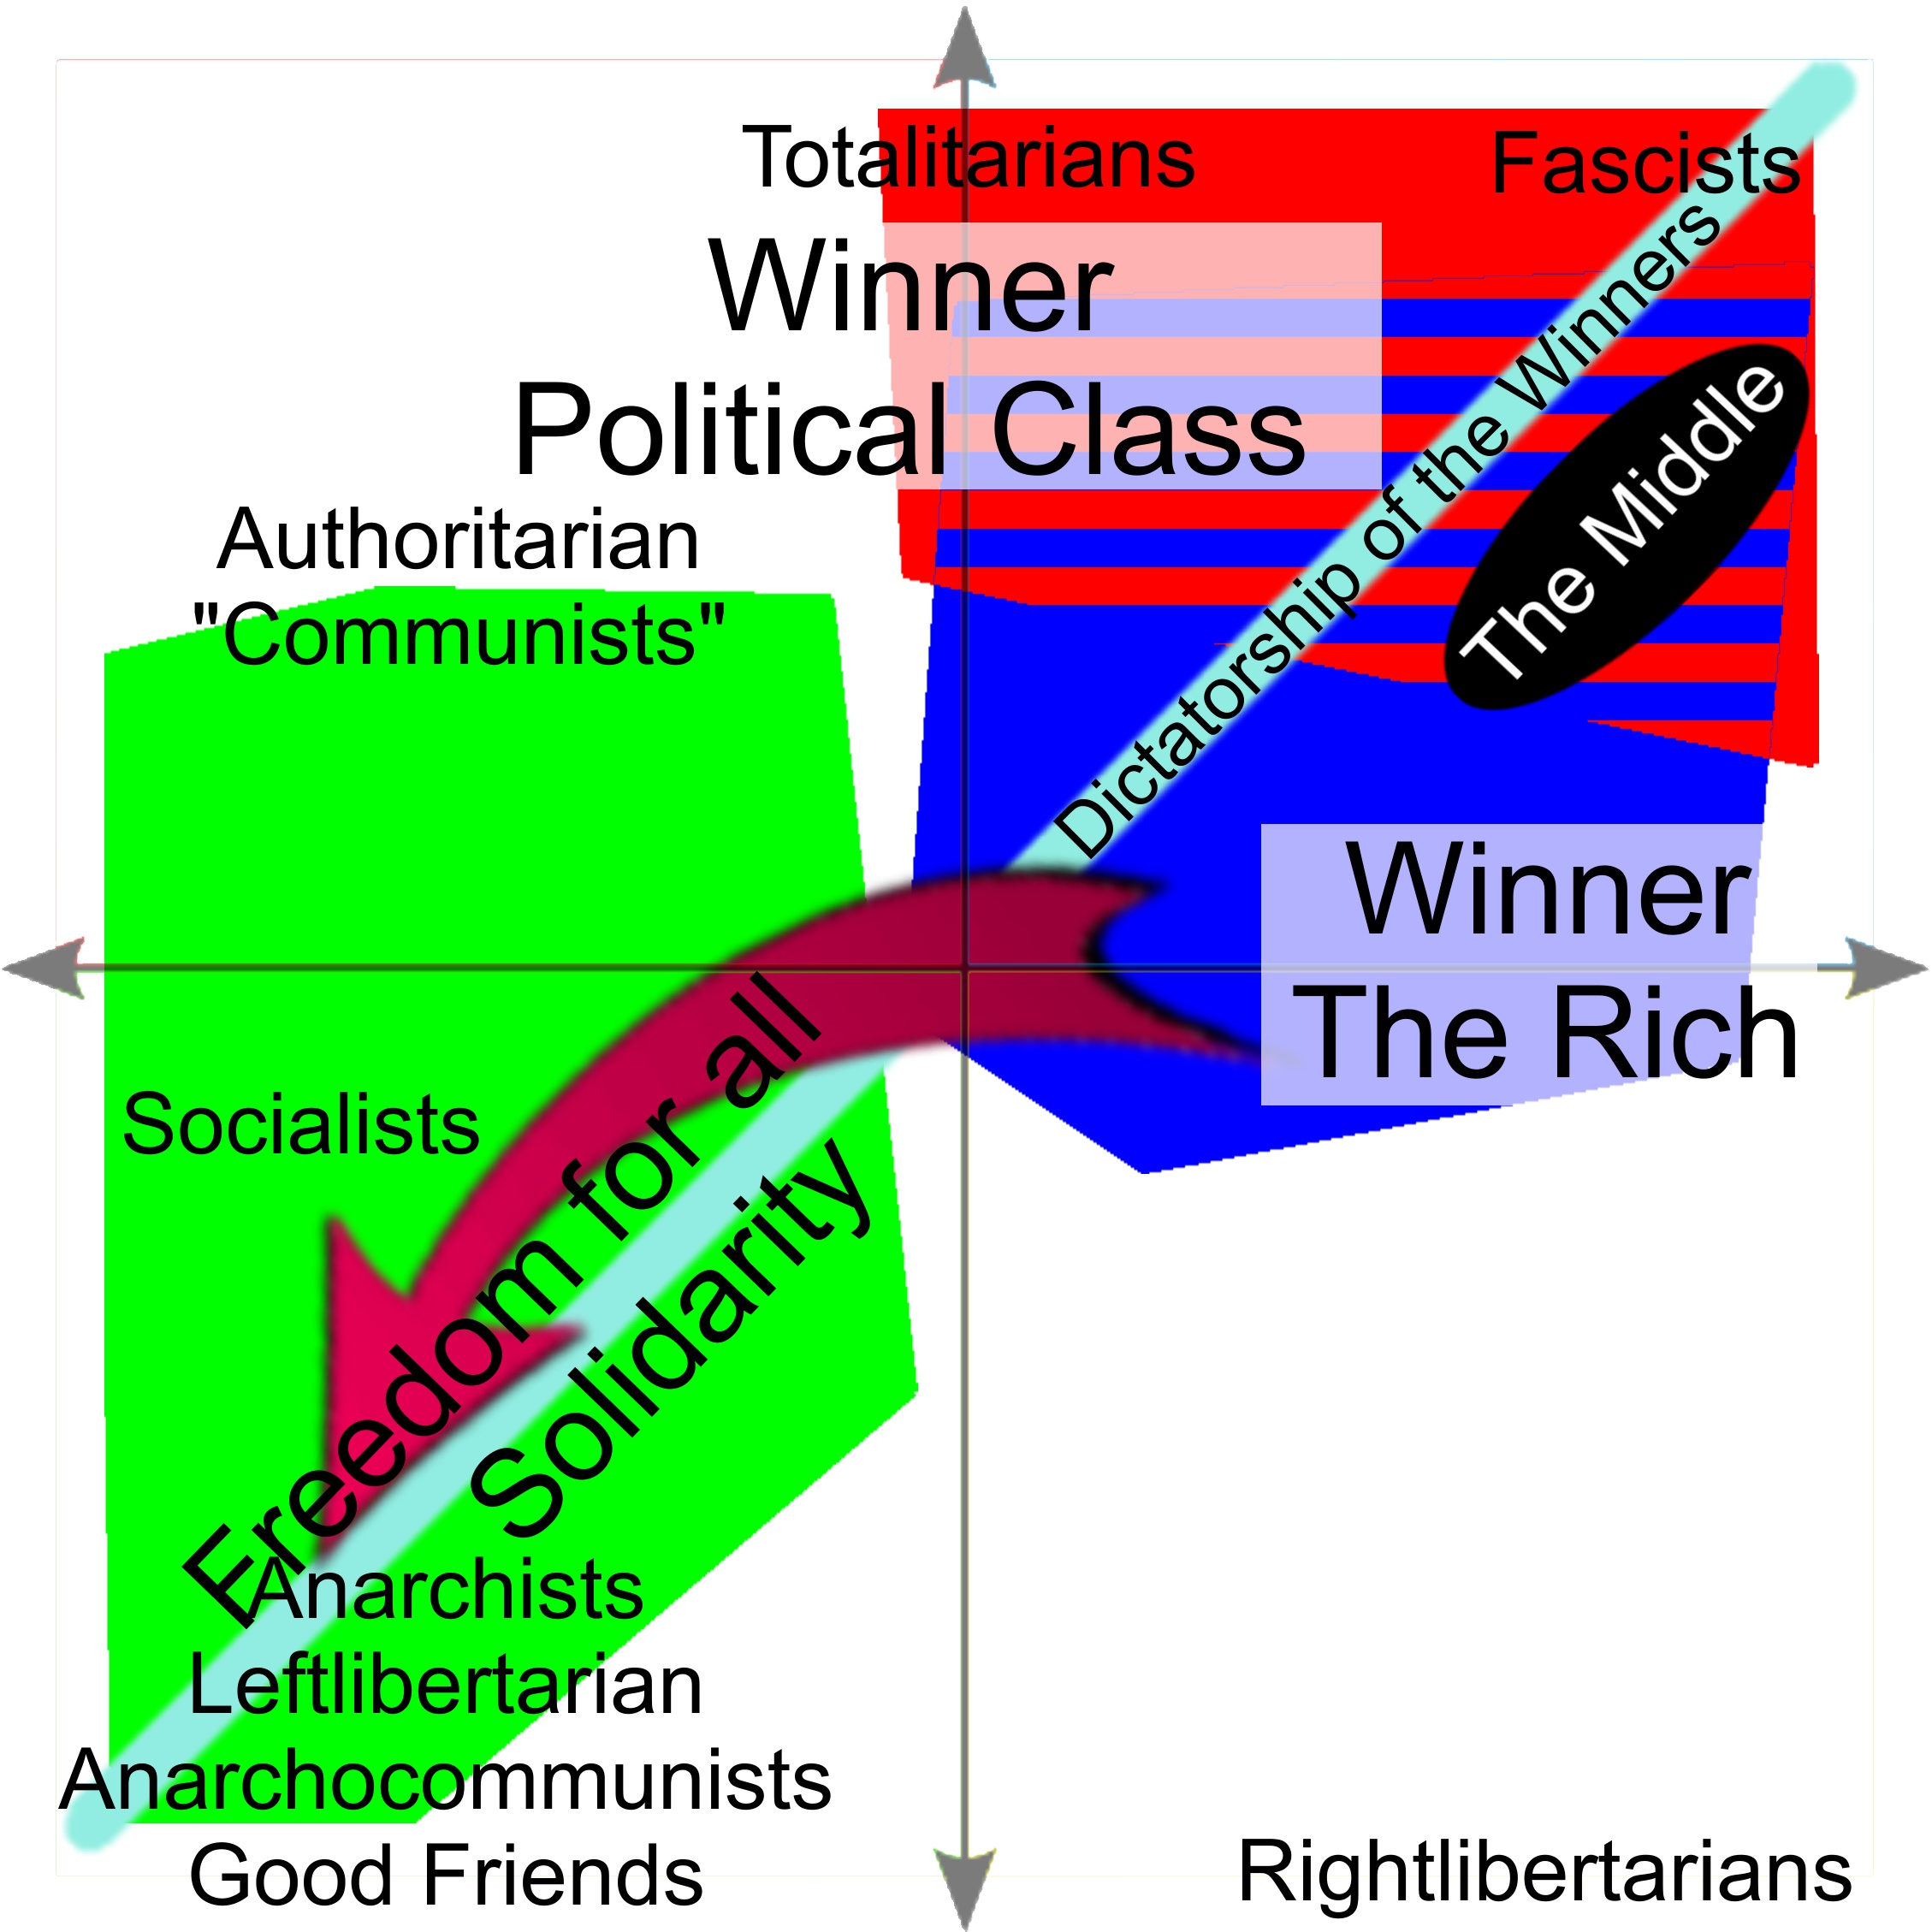 Political spectrum - Systems - Dictatorship of the Winners: - authoritarian right - authoritarian left - libertarian right - libertarian left